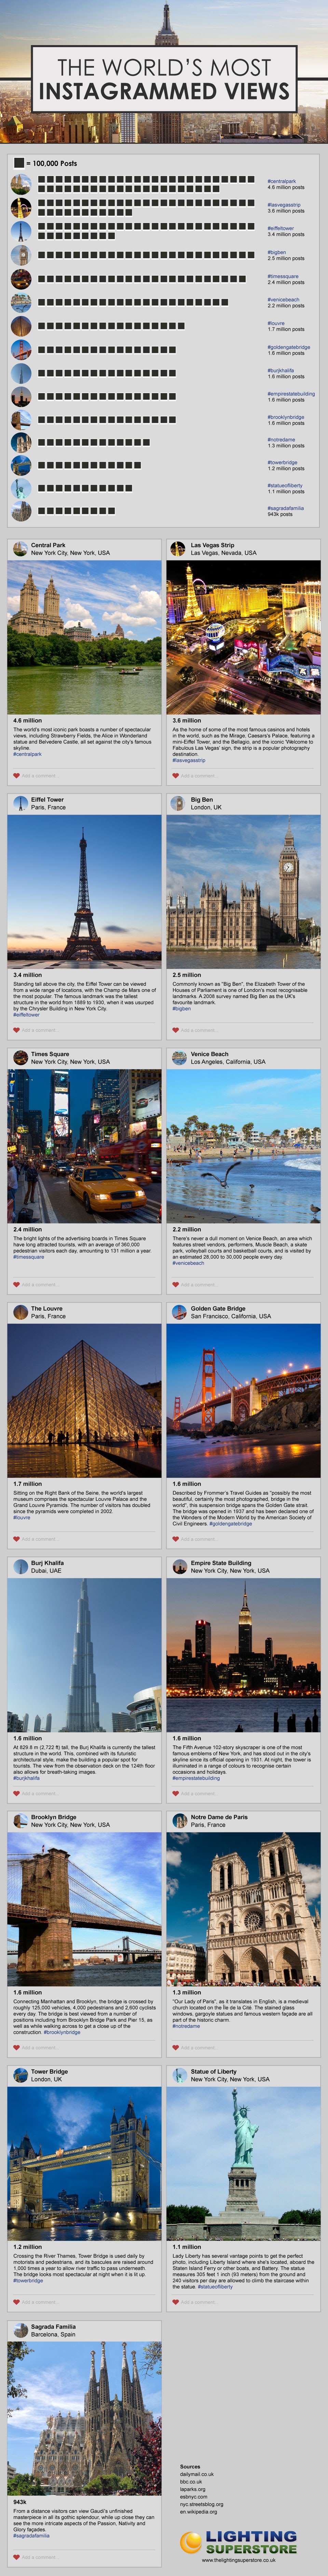 The World's Most Instagrammed Views